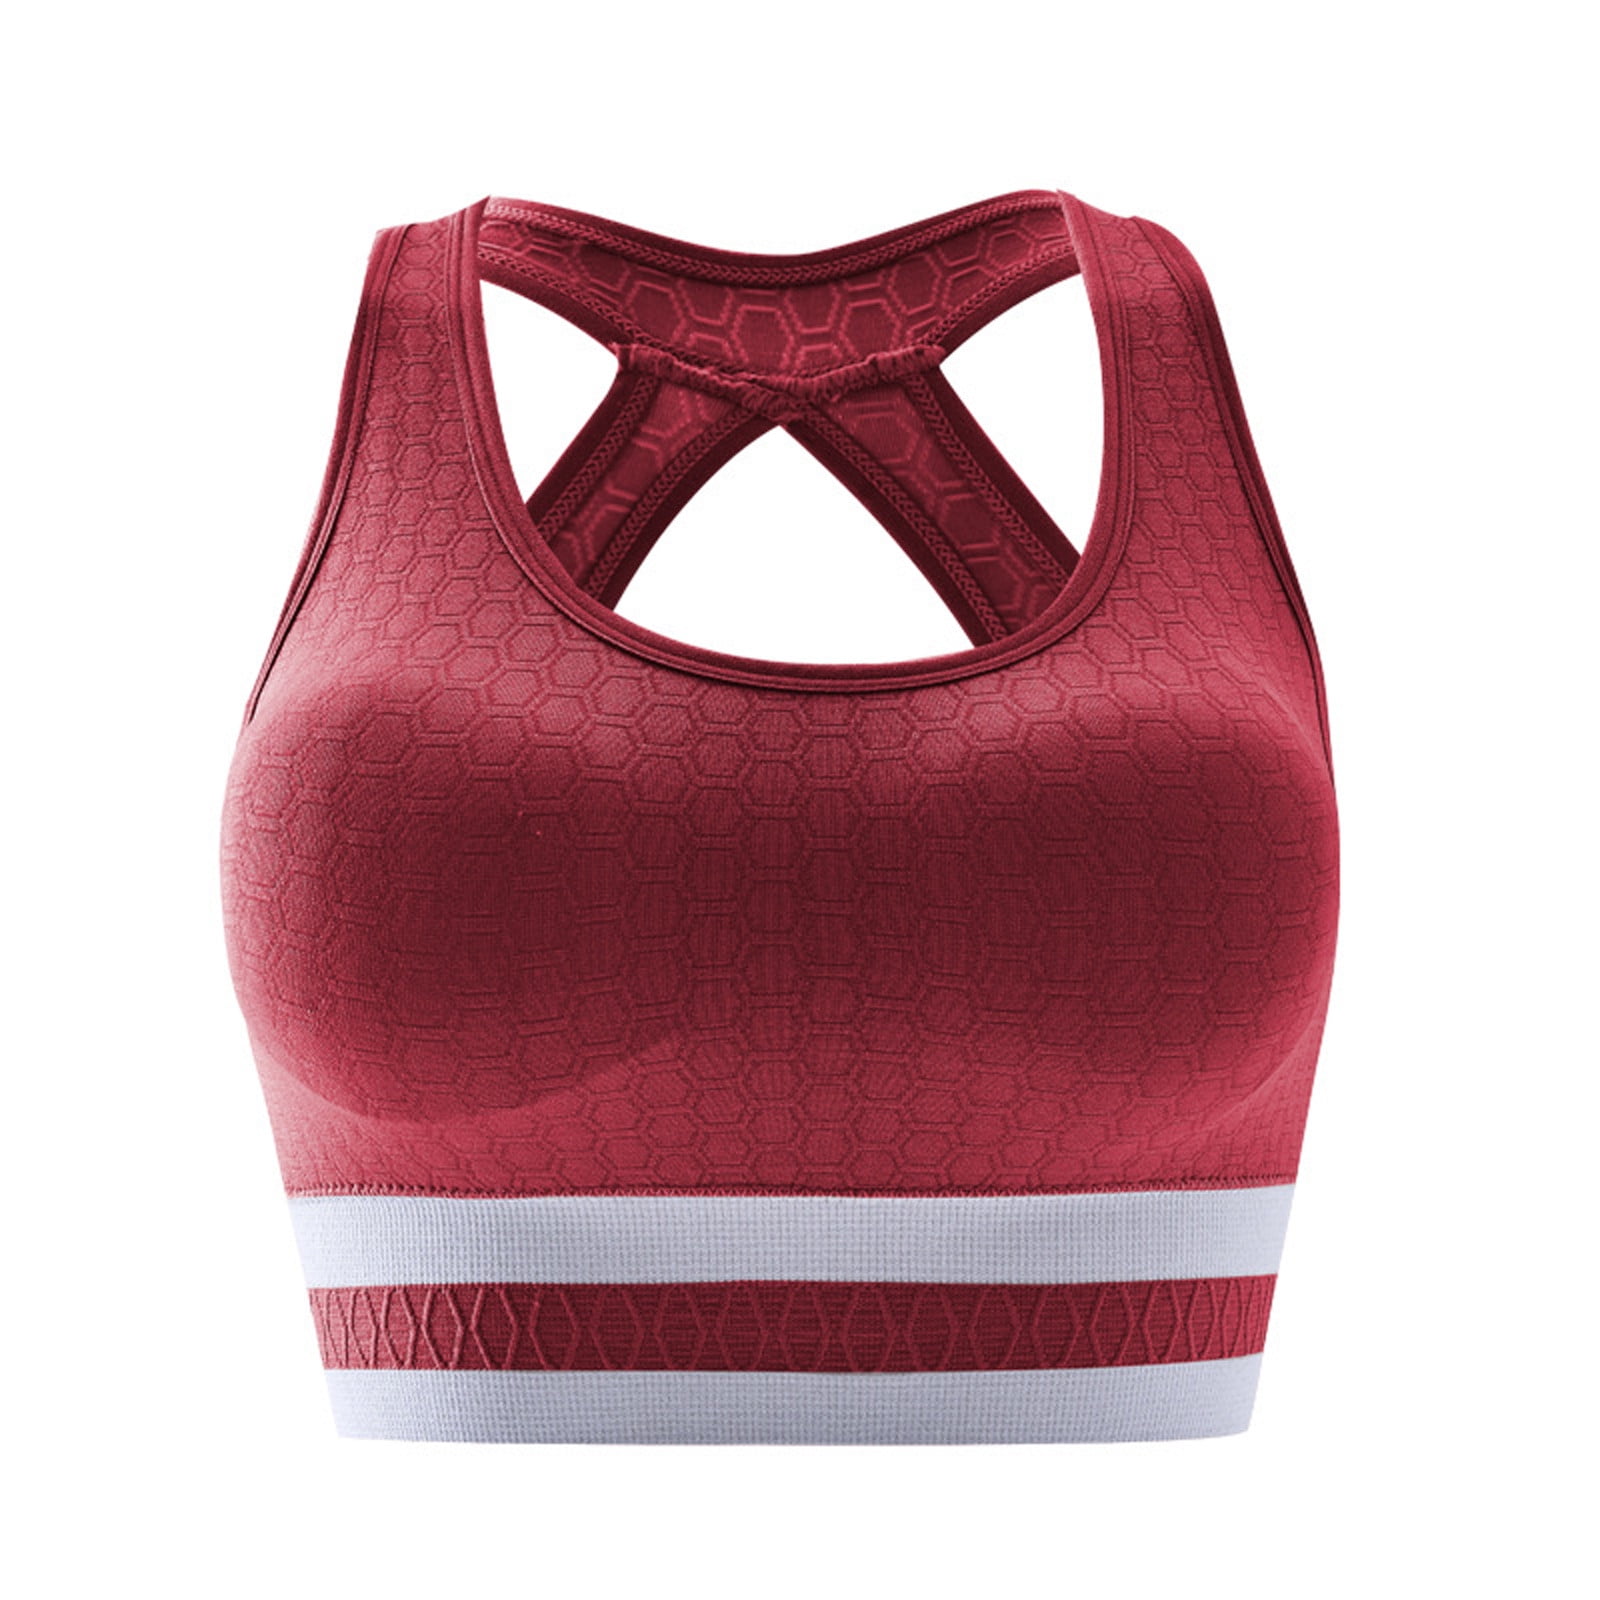  Lfzhjzc Sports Bras for Women High Impact Running, Anti-Sagging  Super Comfort Bra, for Running, Gym, Sports, Fitness (Color : Red, Size :  5X-Large) : Clothing, Shoes & Jewelry